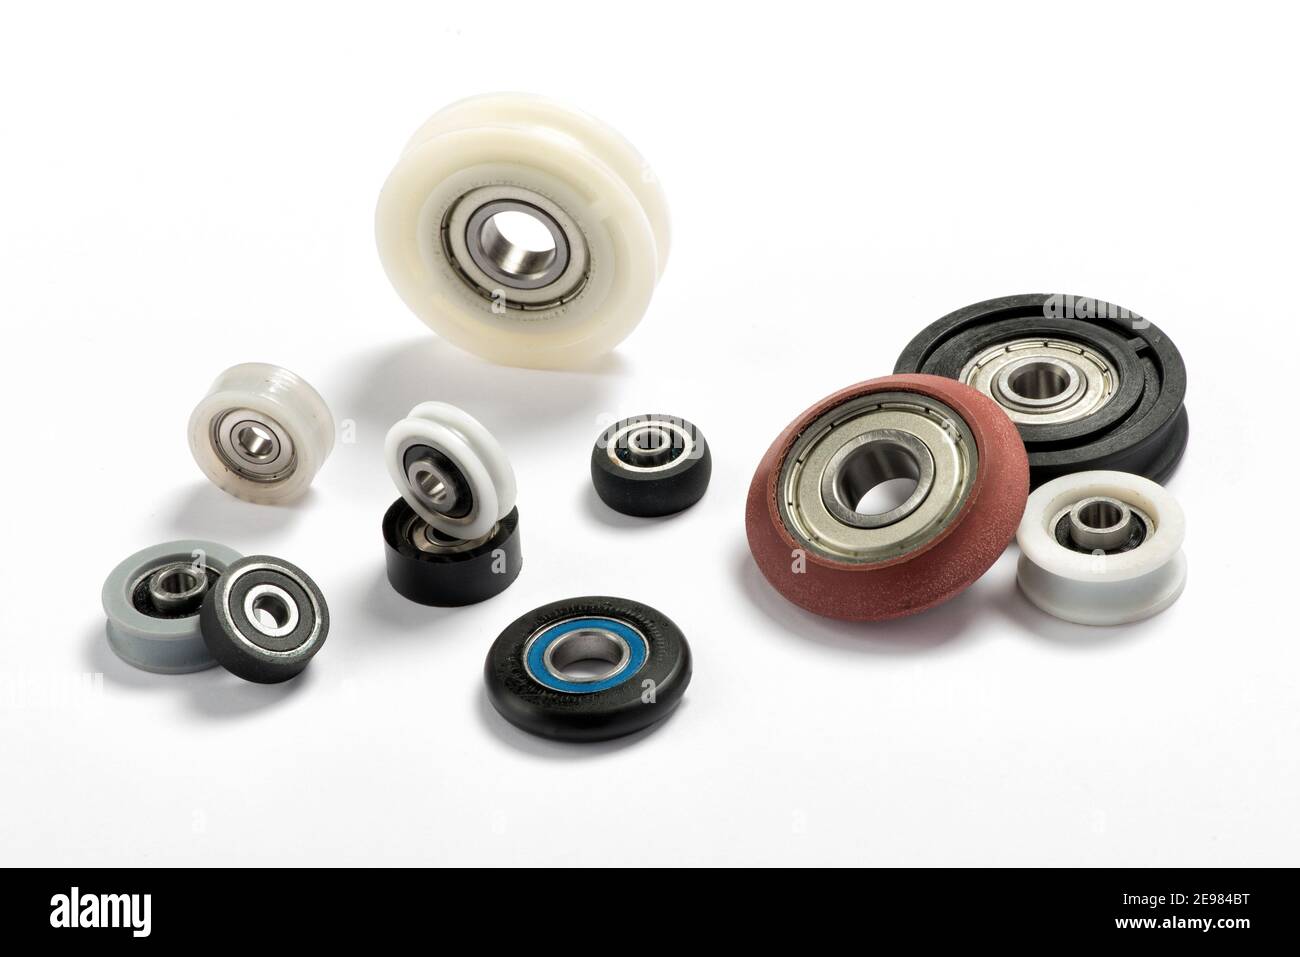 Minimalistic composition with assorted ball bearings of different colors and sizes arranged on white background for industry and engineering concept Stock Photo